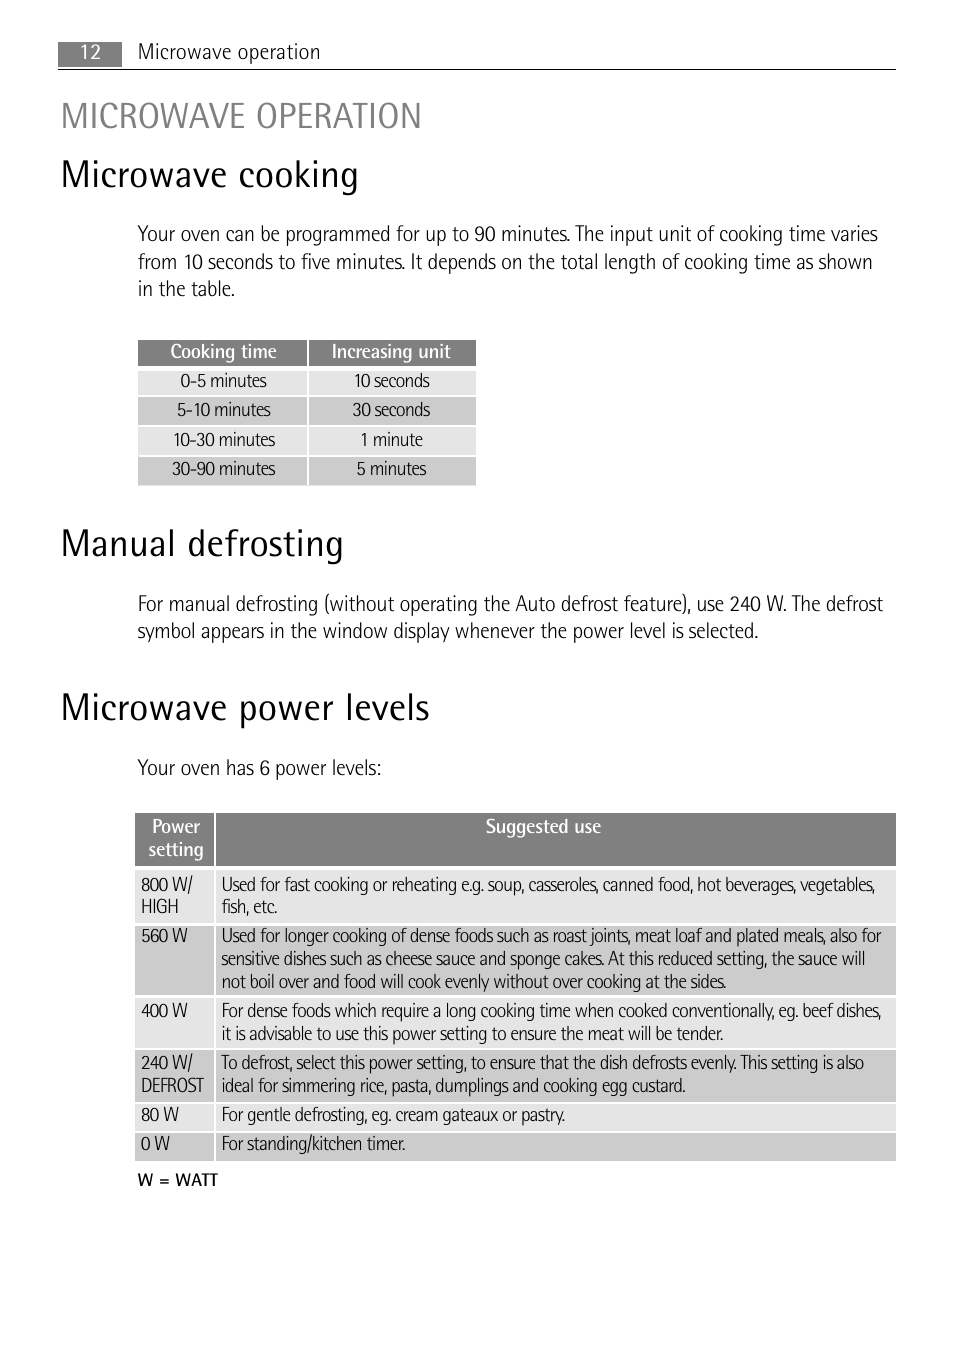 Microwave cooking, Manual defrosting, Microwave power levels | Microwave operation | AEG MC2664E-W User Manual | Page 12 / 36